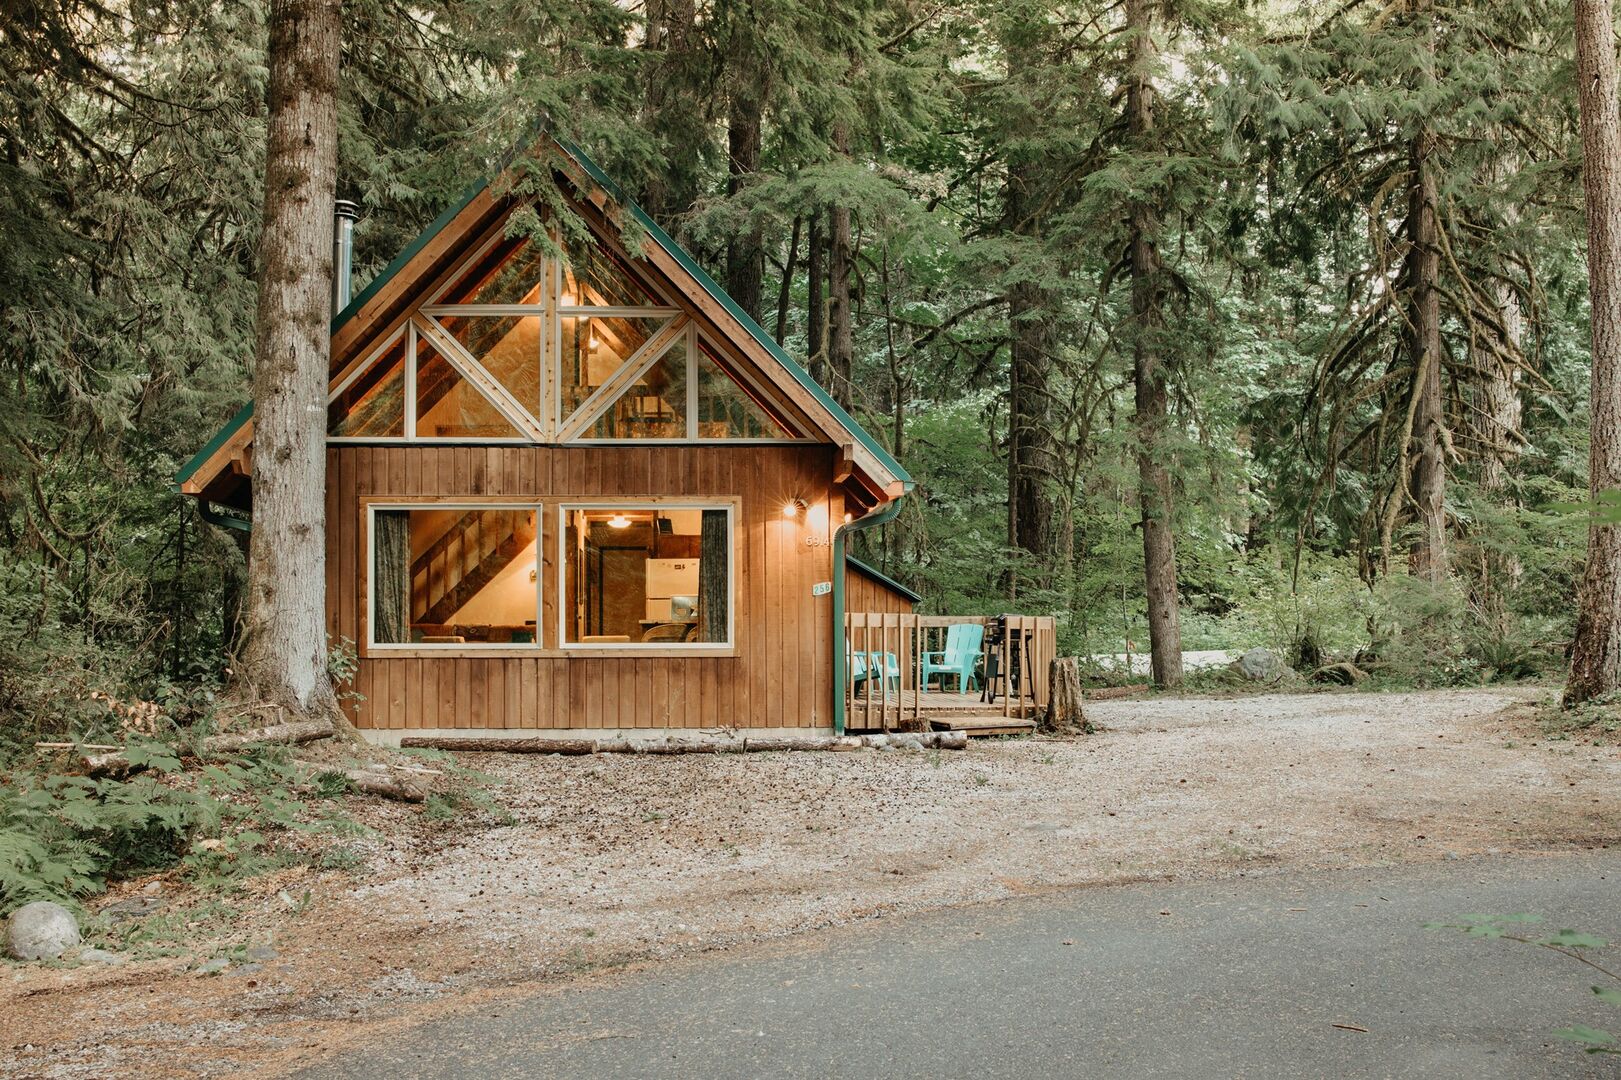 Snowline Cabin #24 - A Great and Rustic Mt. Baker Experience!